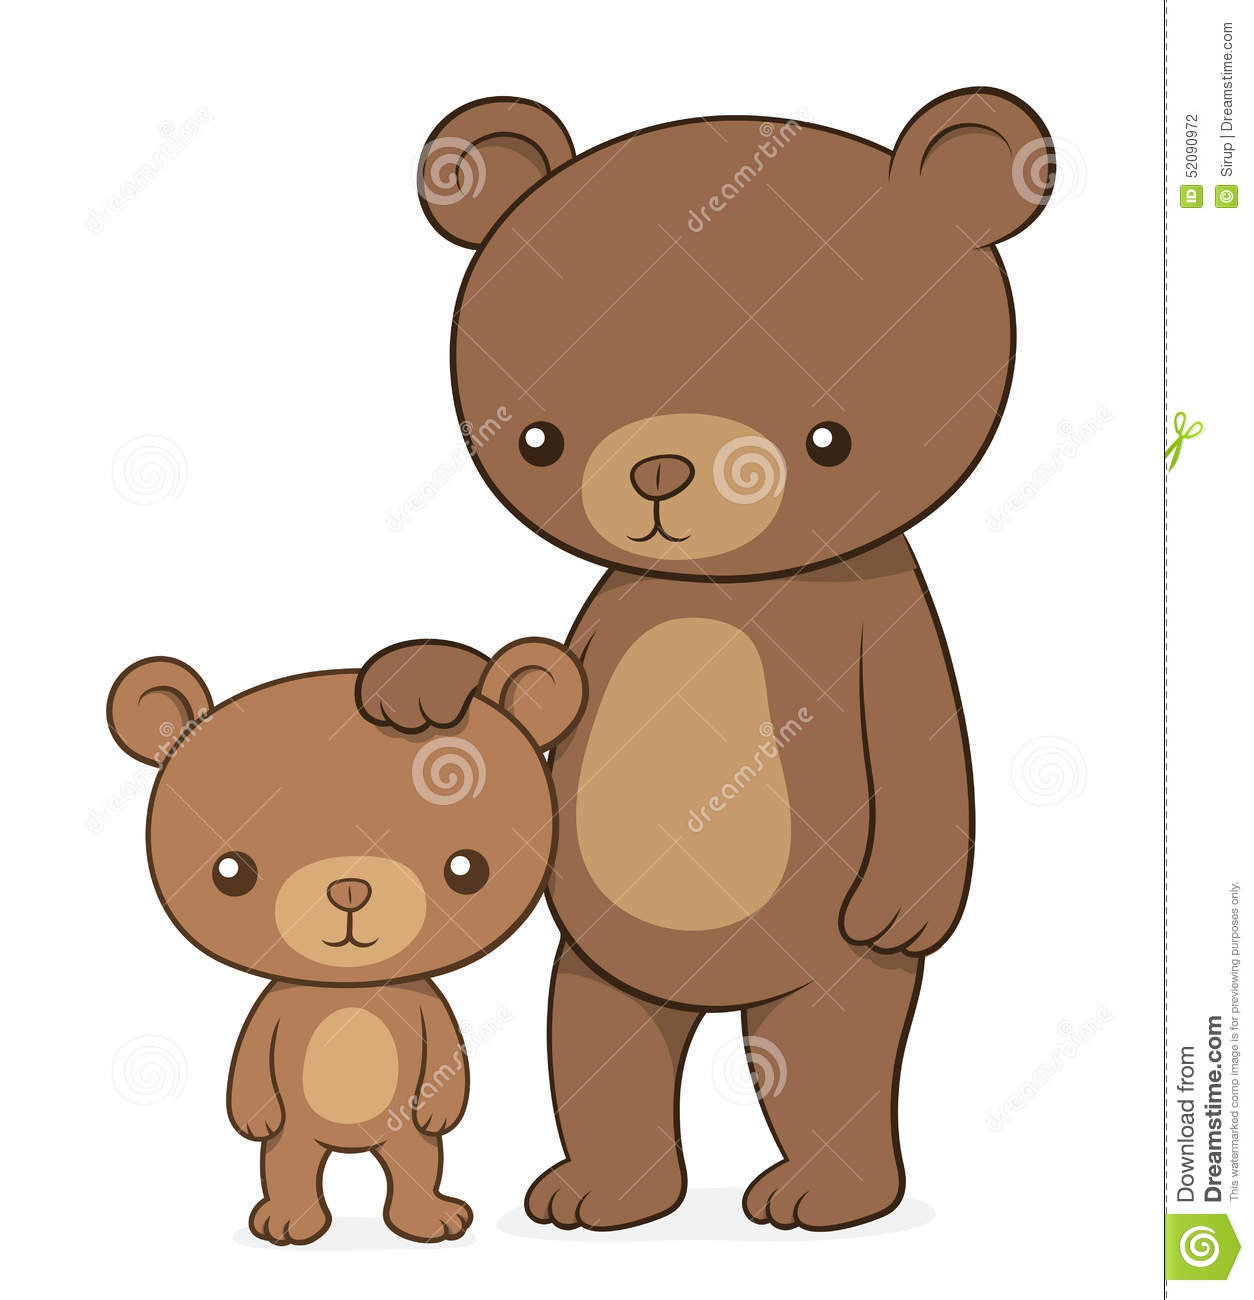 Grizzly Cubs clipart #10, Download drawings